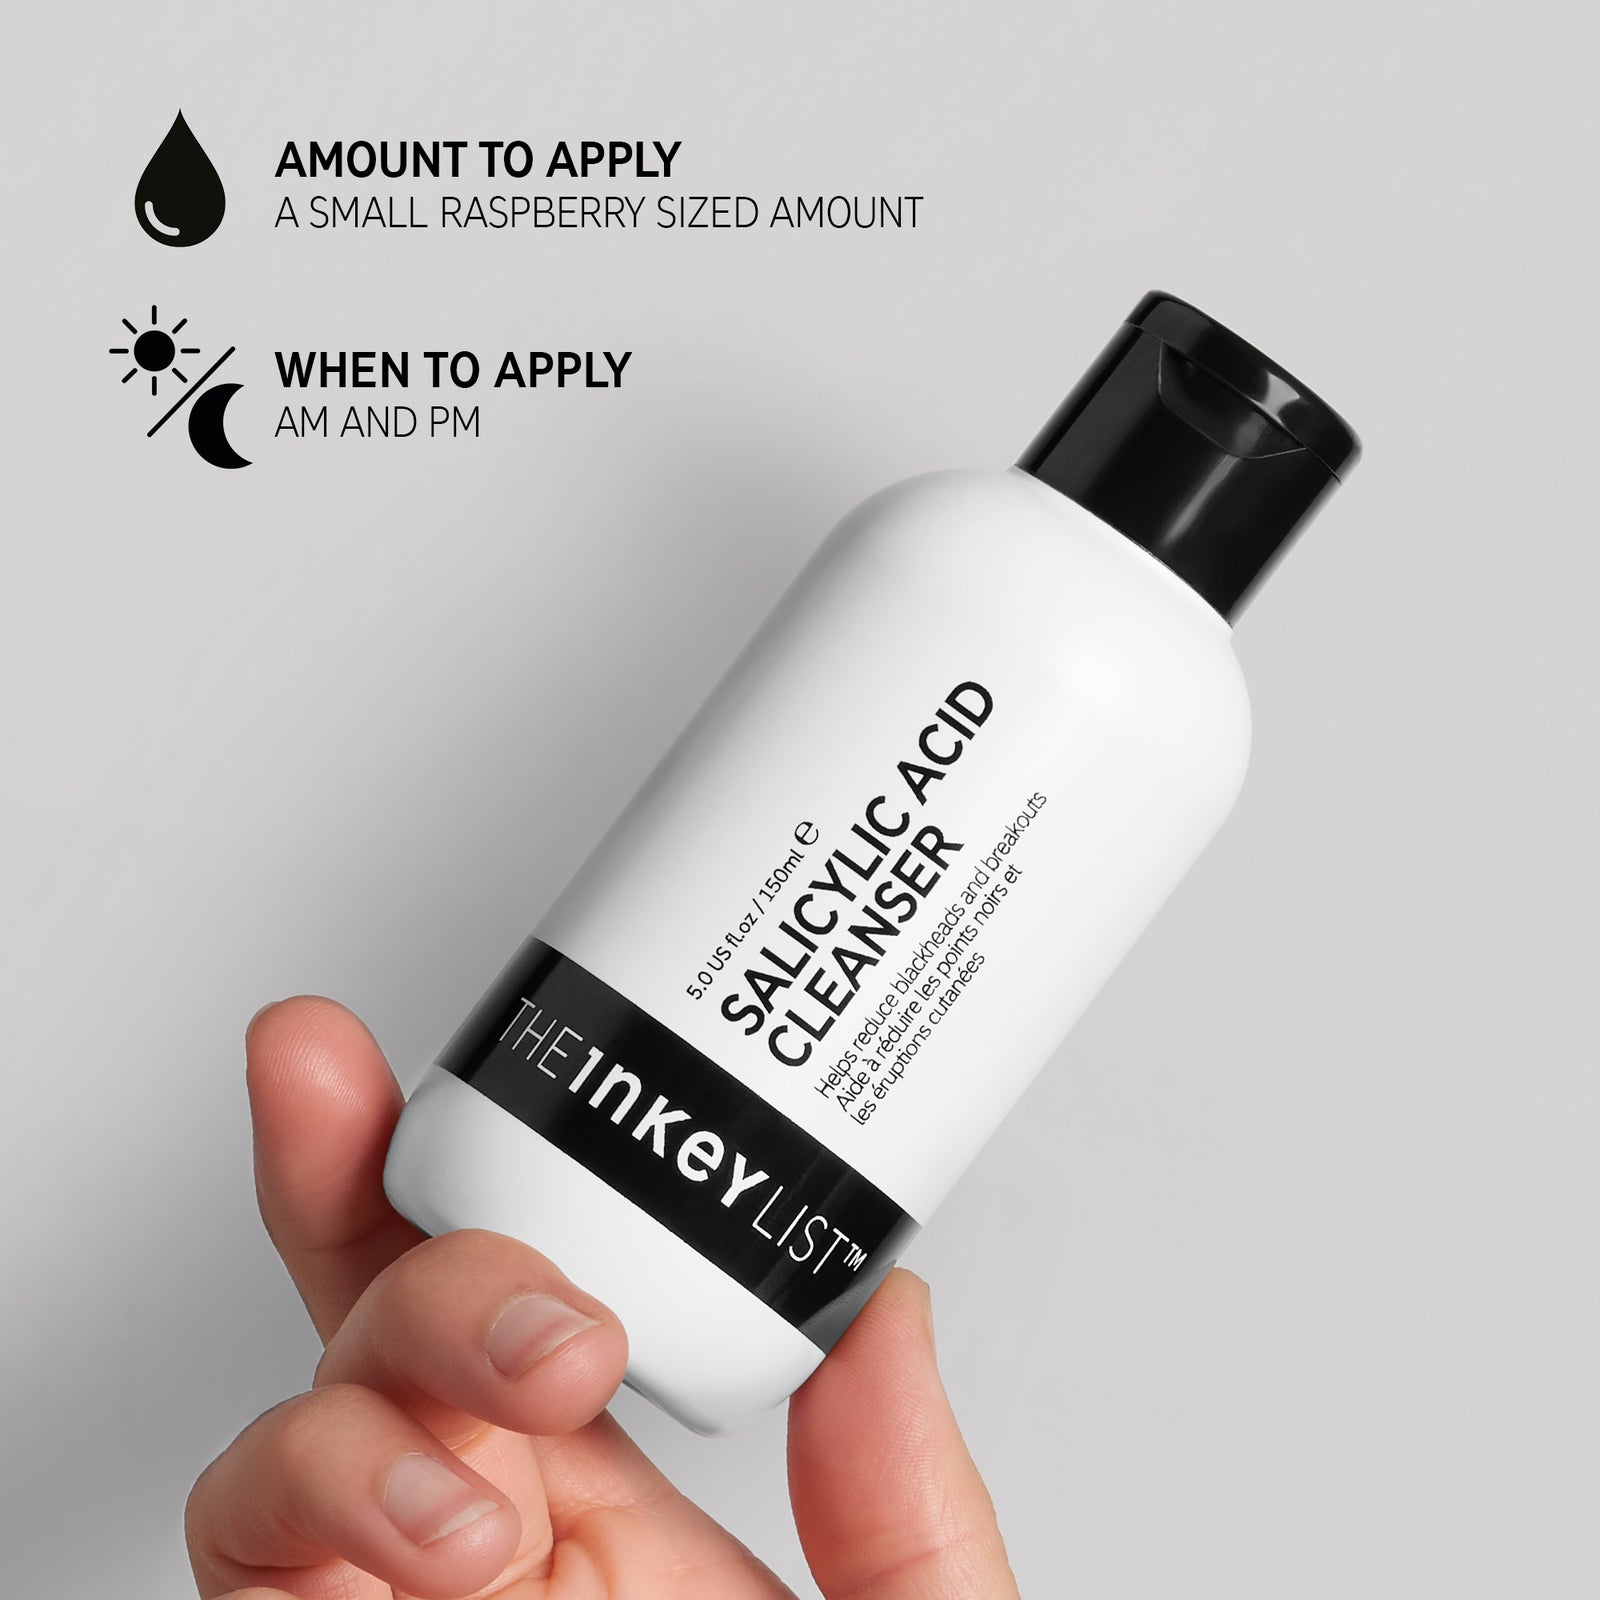 Hand holding Salicylic Acid Cleanser bottle with black text explaining how and when to use it. The text reads 'Amount to apply (small raspberry sized amount)' and 'When to apply (AM and PM)'